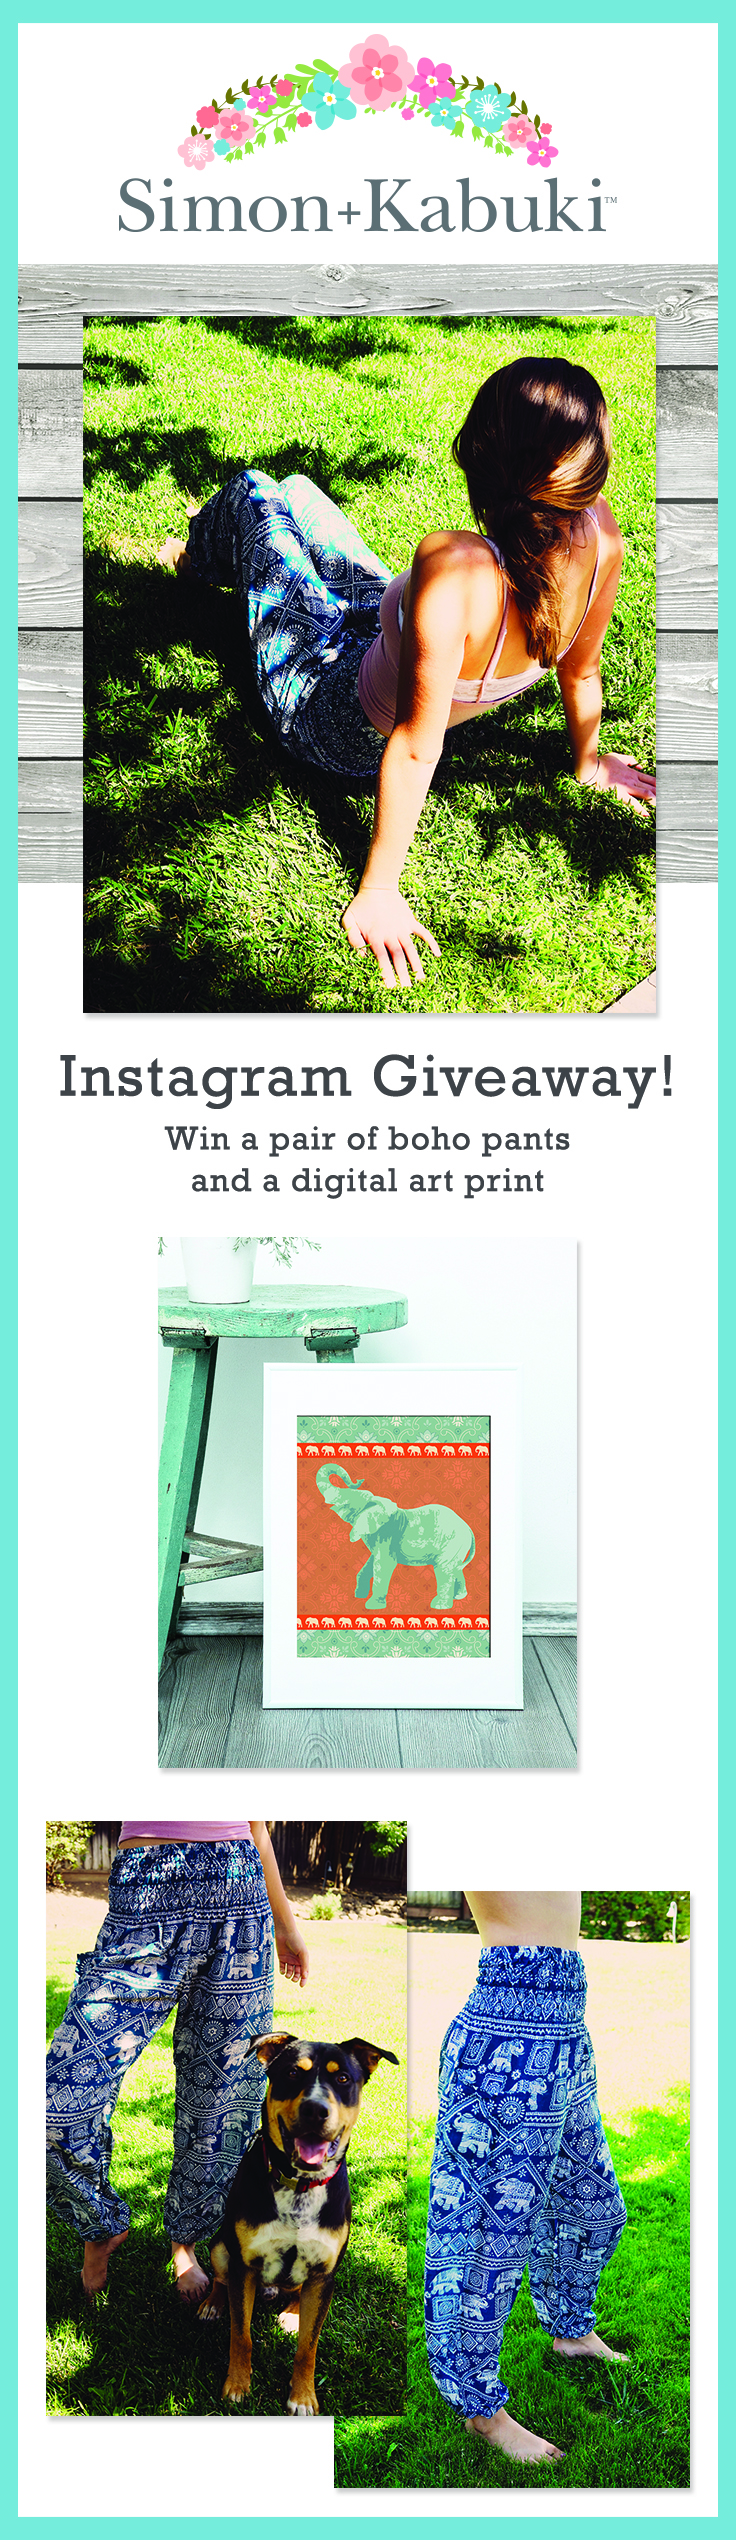 Check out our Instagram Giveaway!